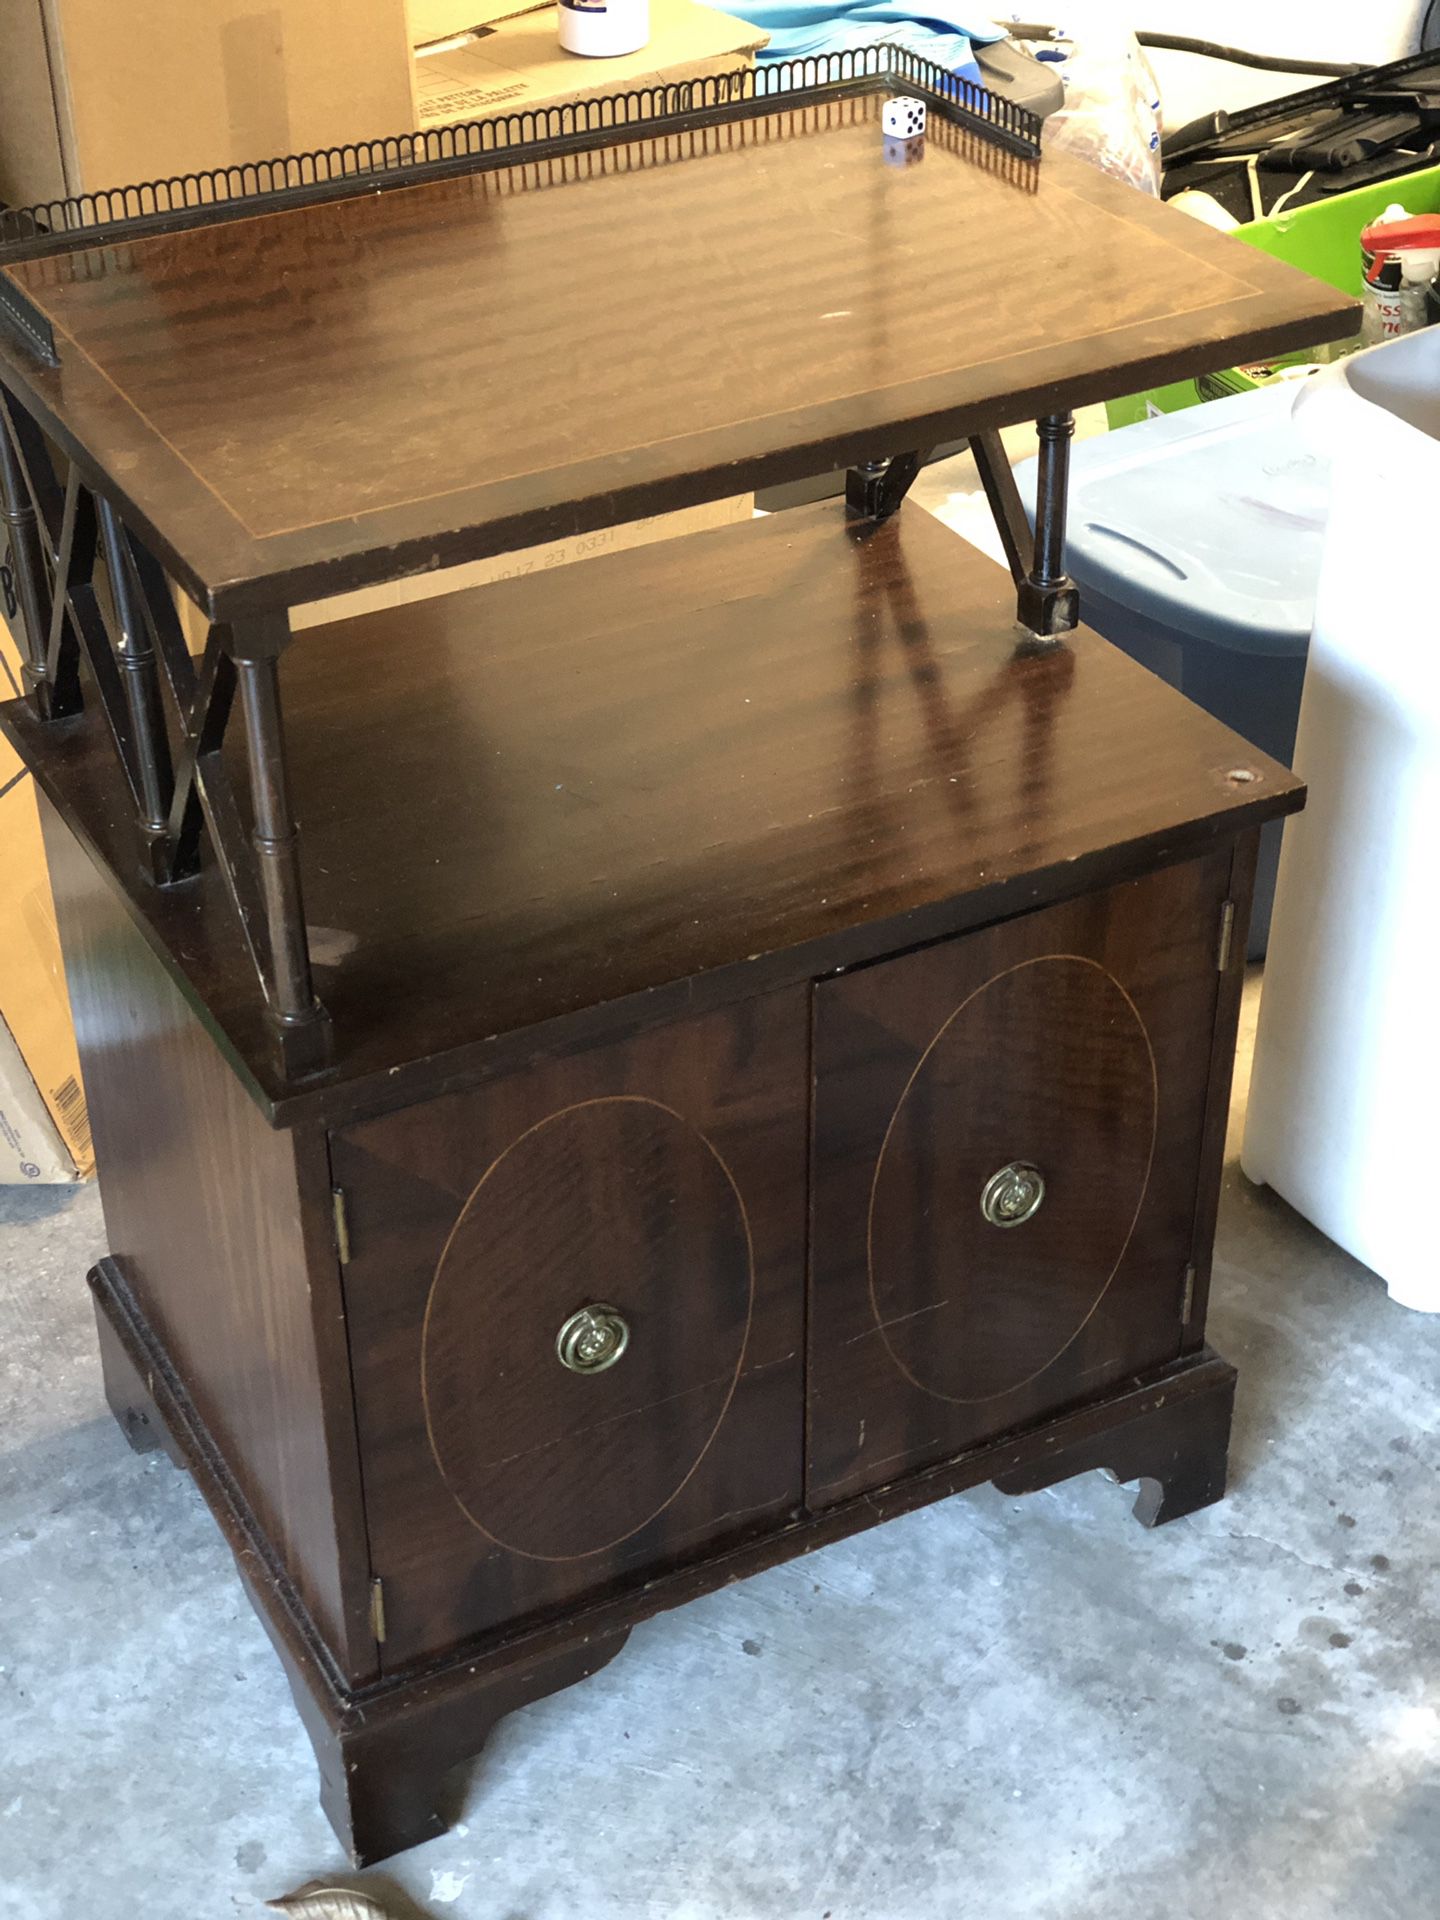 Antique night stand (I have the missing leg)